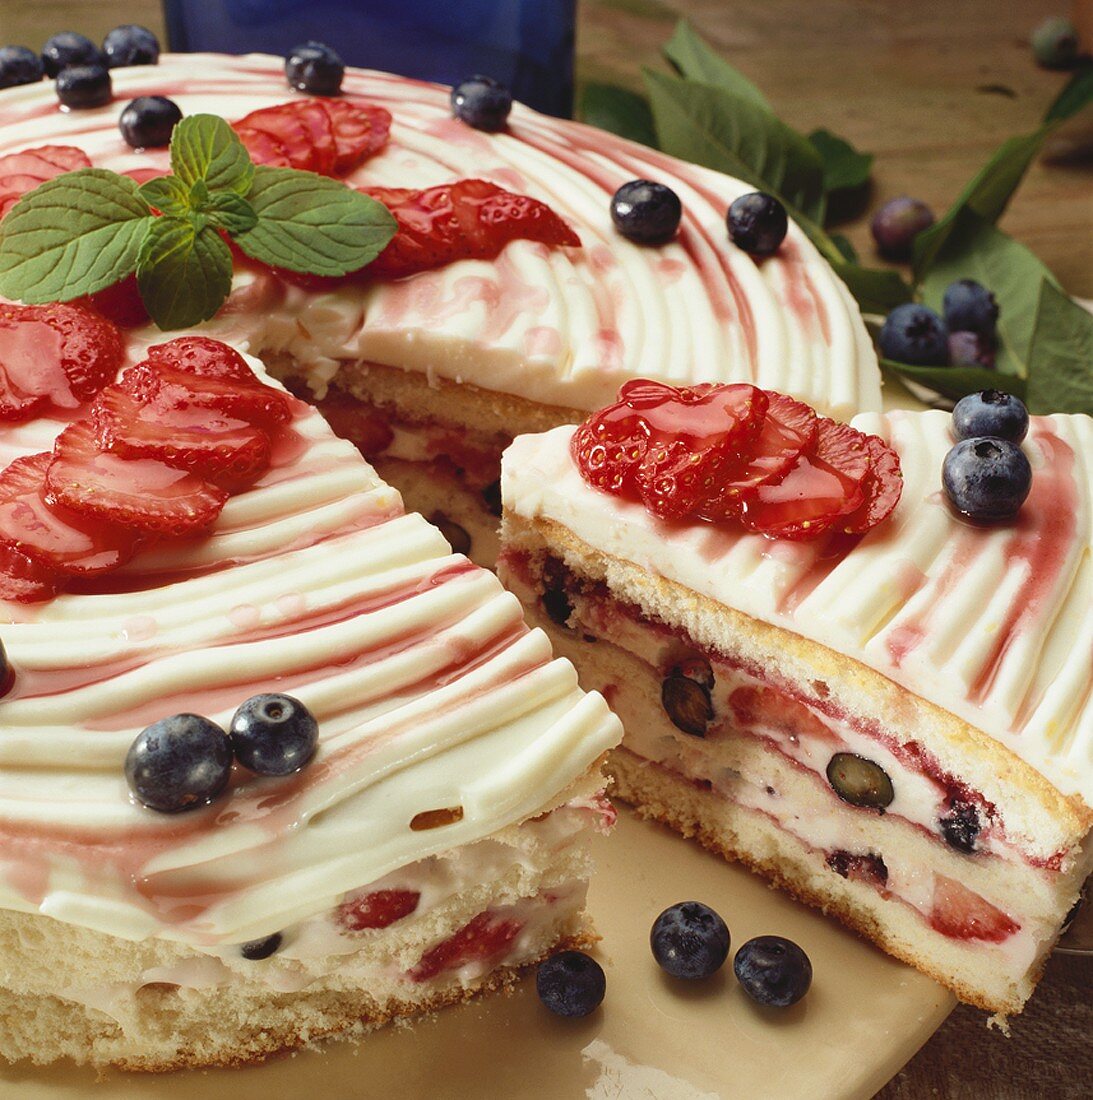 Sponge cake with yoghurt and berry filling